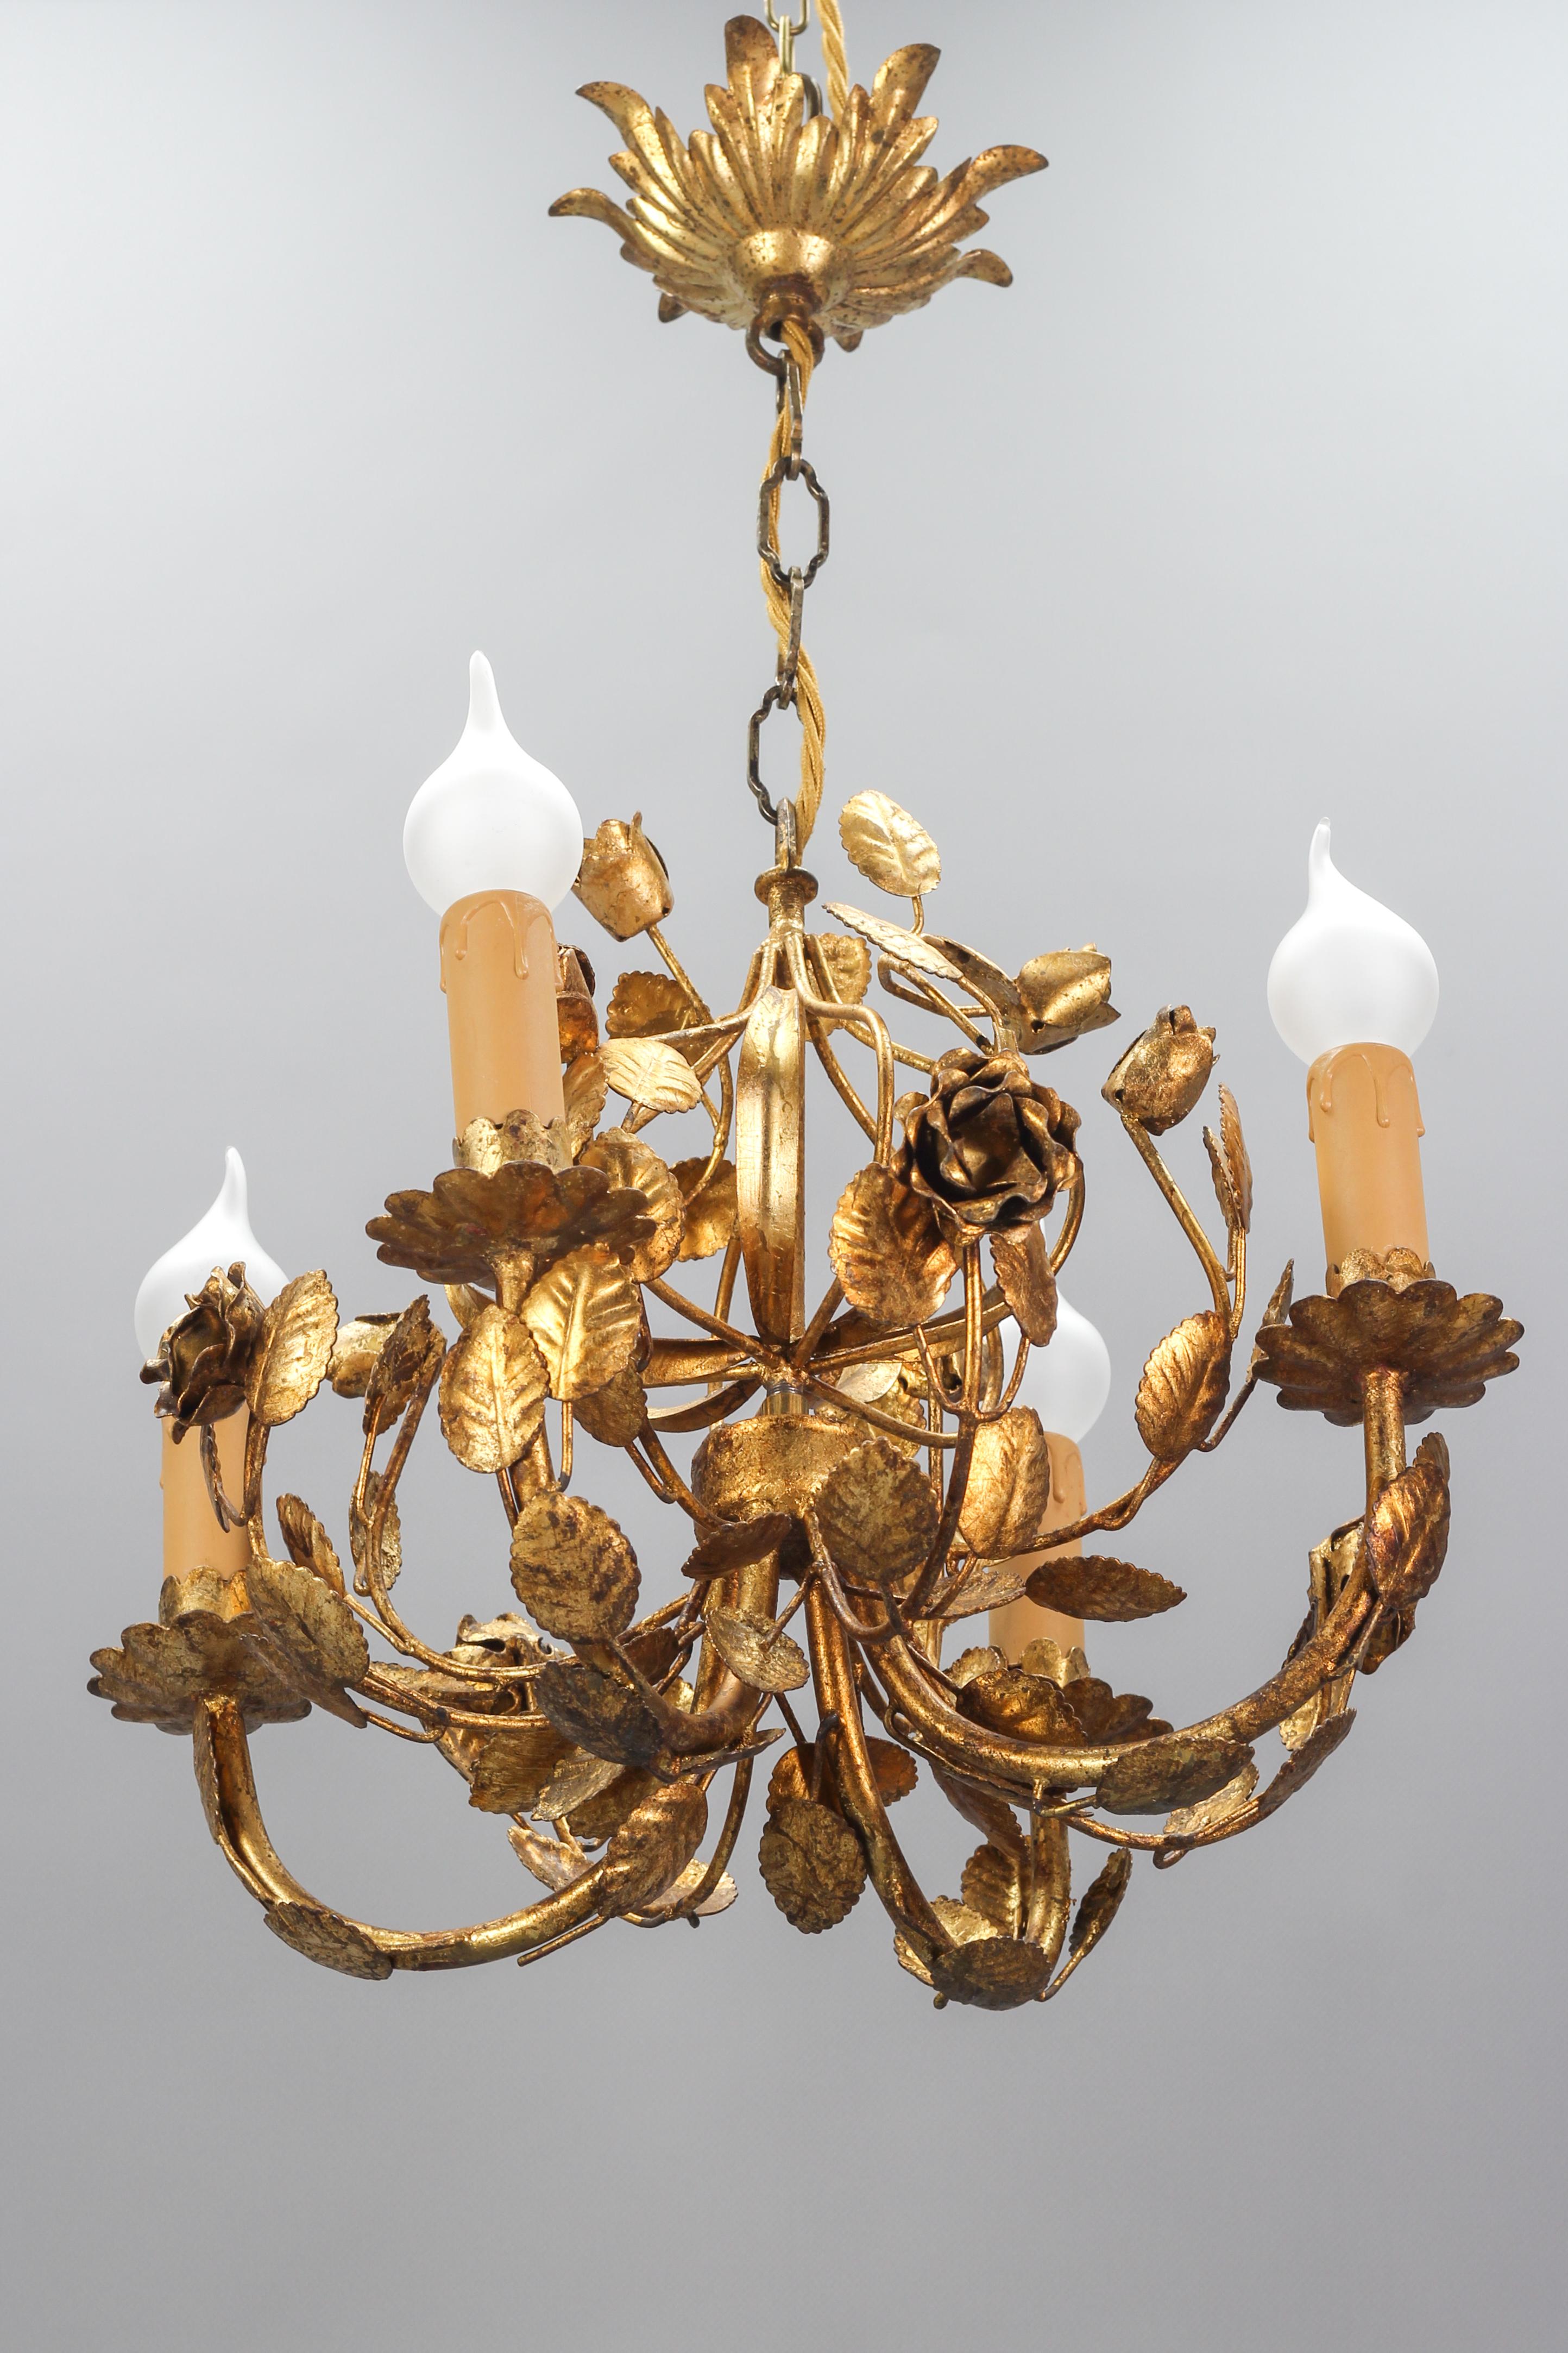 A beautiful Italian Hollywood Regency style or Florentine gilt metal four-light chandelier from the 1970s. This golden metal light fixture is adorned with charming flowers - roses and leaves. 
Four sockets for E14-size light bulbs.
Dimensions: